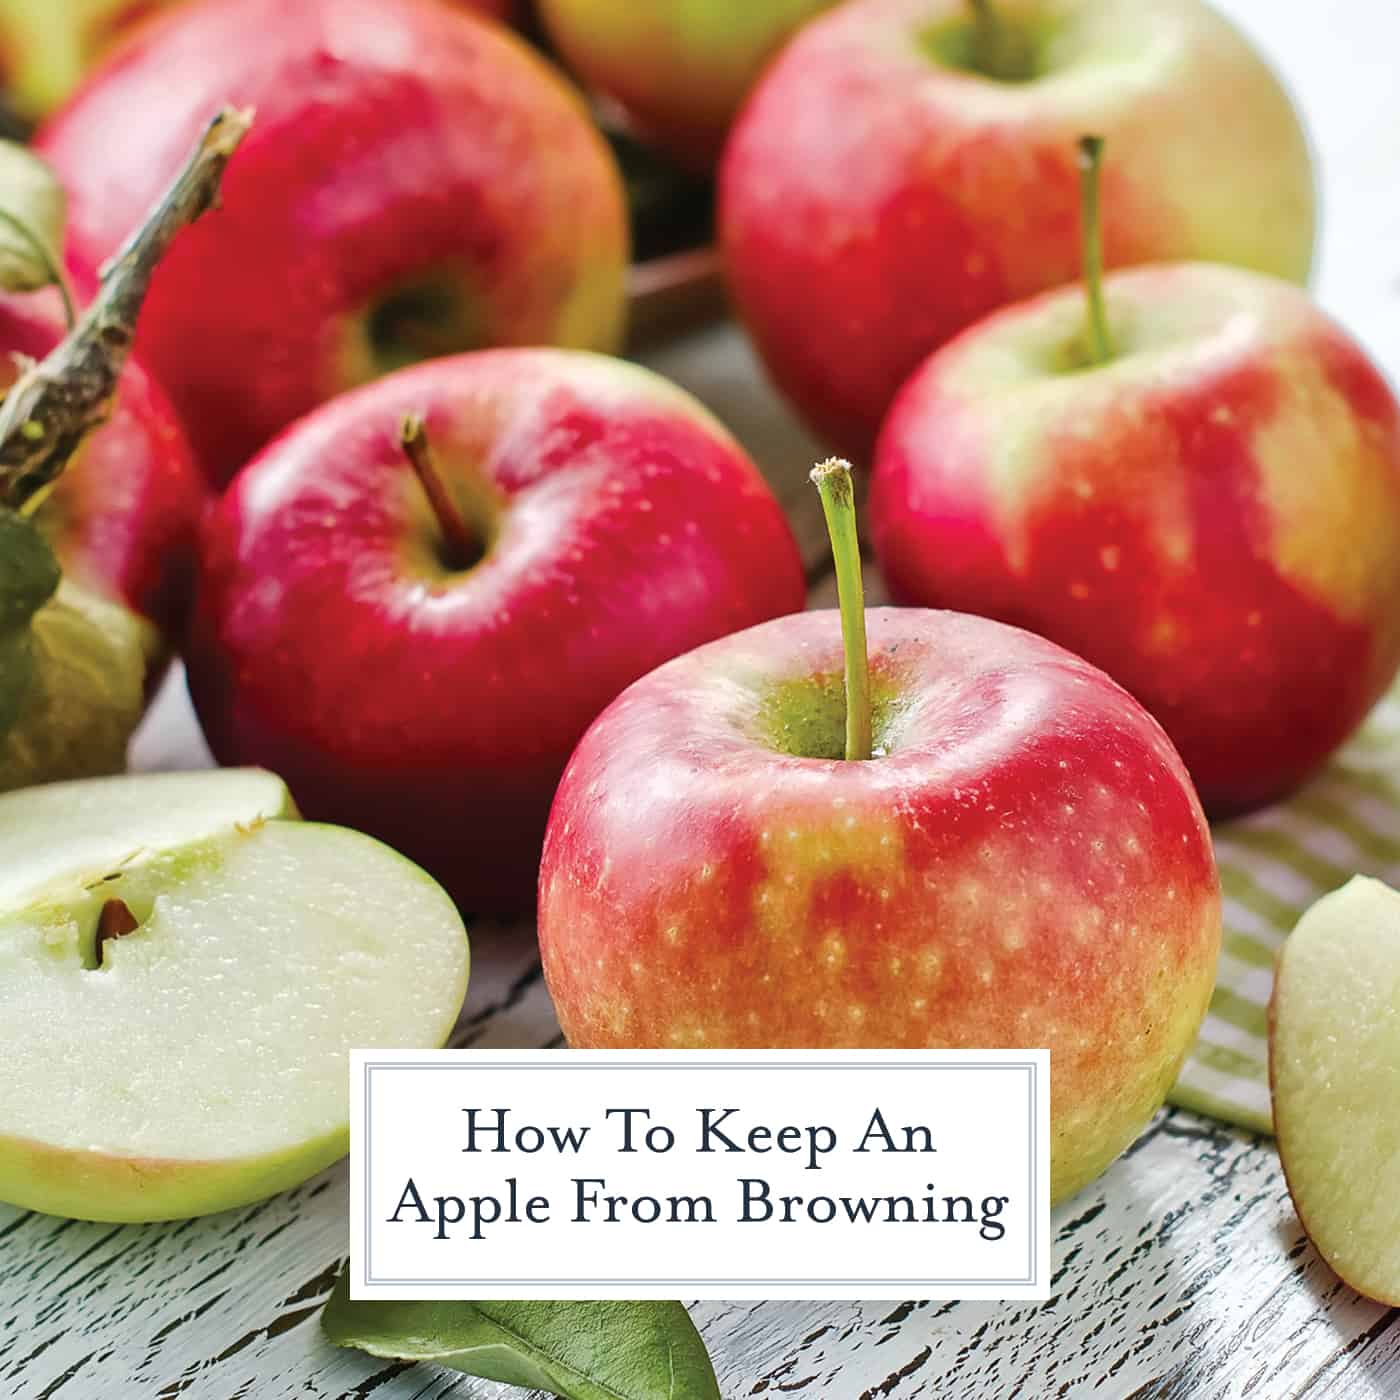 Three easy ways on how to keep apples from browning. You will already have all of the items in your kitchen pantry. Treated apples can be used in any apple recipe! #howtokeepapplesfrombrowning #applebrowning www.savoryexperiments.com 